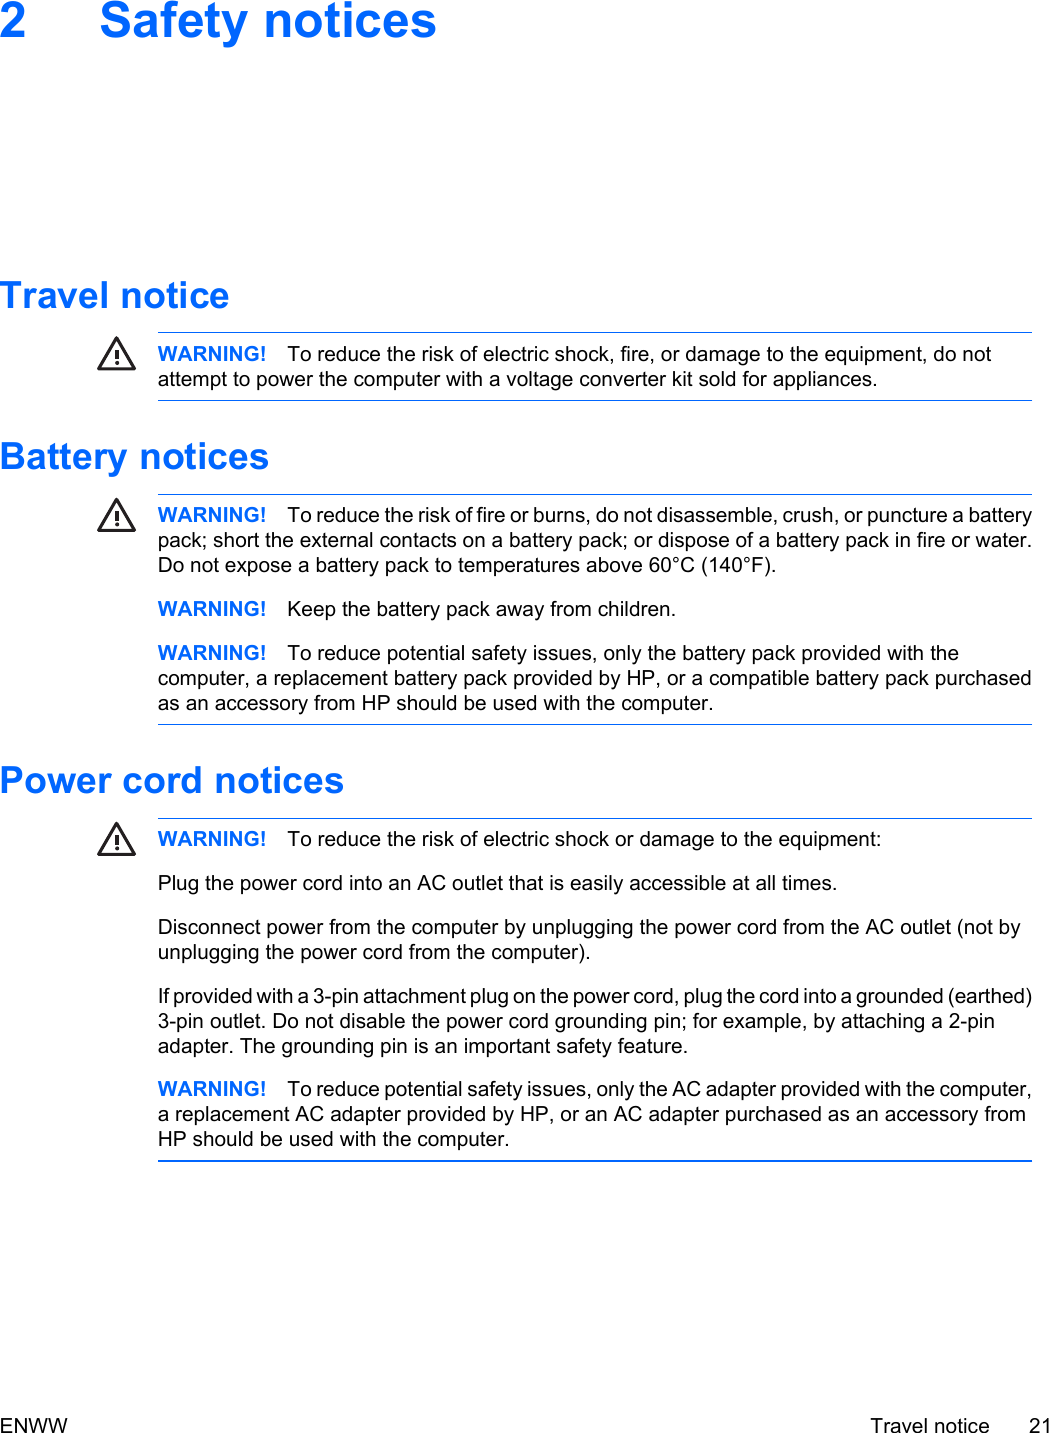 2 Safety noticesTravel noticeWARNING! To reduce the risk of electric shock, fire, or damage to the equipment, do notattempt to power the computer with a voltage converter kit sold for appliances.Battery noticesWARNING! To reduce the risk of fire or burns, do not disassemble, crush, or puncture a batterypack; short the external contacts on a battery pack; or dispose of a battery pack in fire or water.Do not expose a battery pack to temperatures above 60°C (140°F).WARNING! Keep the battery pack away from children.WARNING! To reduce potential safety issues, only the battery pack provided with thecomputer, a replacement battery pack provided by HP, or a compatible battery pack purchasedas an accessory from HP should be used with the computer.Power cord noticesWARNING! To reduce the risk of electric shock or damage to the equipment:Plug the power cord into an AC outlet that is easily accessible at all times.Disconnect power from the computer by unplugging the power cord from the AC outlet (not byunplugging the power cord from the computer).If provided with a 3-pin attachment plug on the power cord, plug the cord into a grounded (earthed)3-pin outlet. Do not disable the power cord grounding pin; for example, by attaching a 2-pinadapter. The grounding pin is an important safety feature.WARNING! To reduce potential safety issues, only the AC adapter provided with the computer,a replacement AC adapter provided by HP, or an AC adapter purchased as an accessory fromHP should be used with the computer.ENWW Travel notice 21